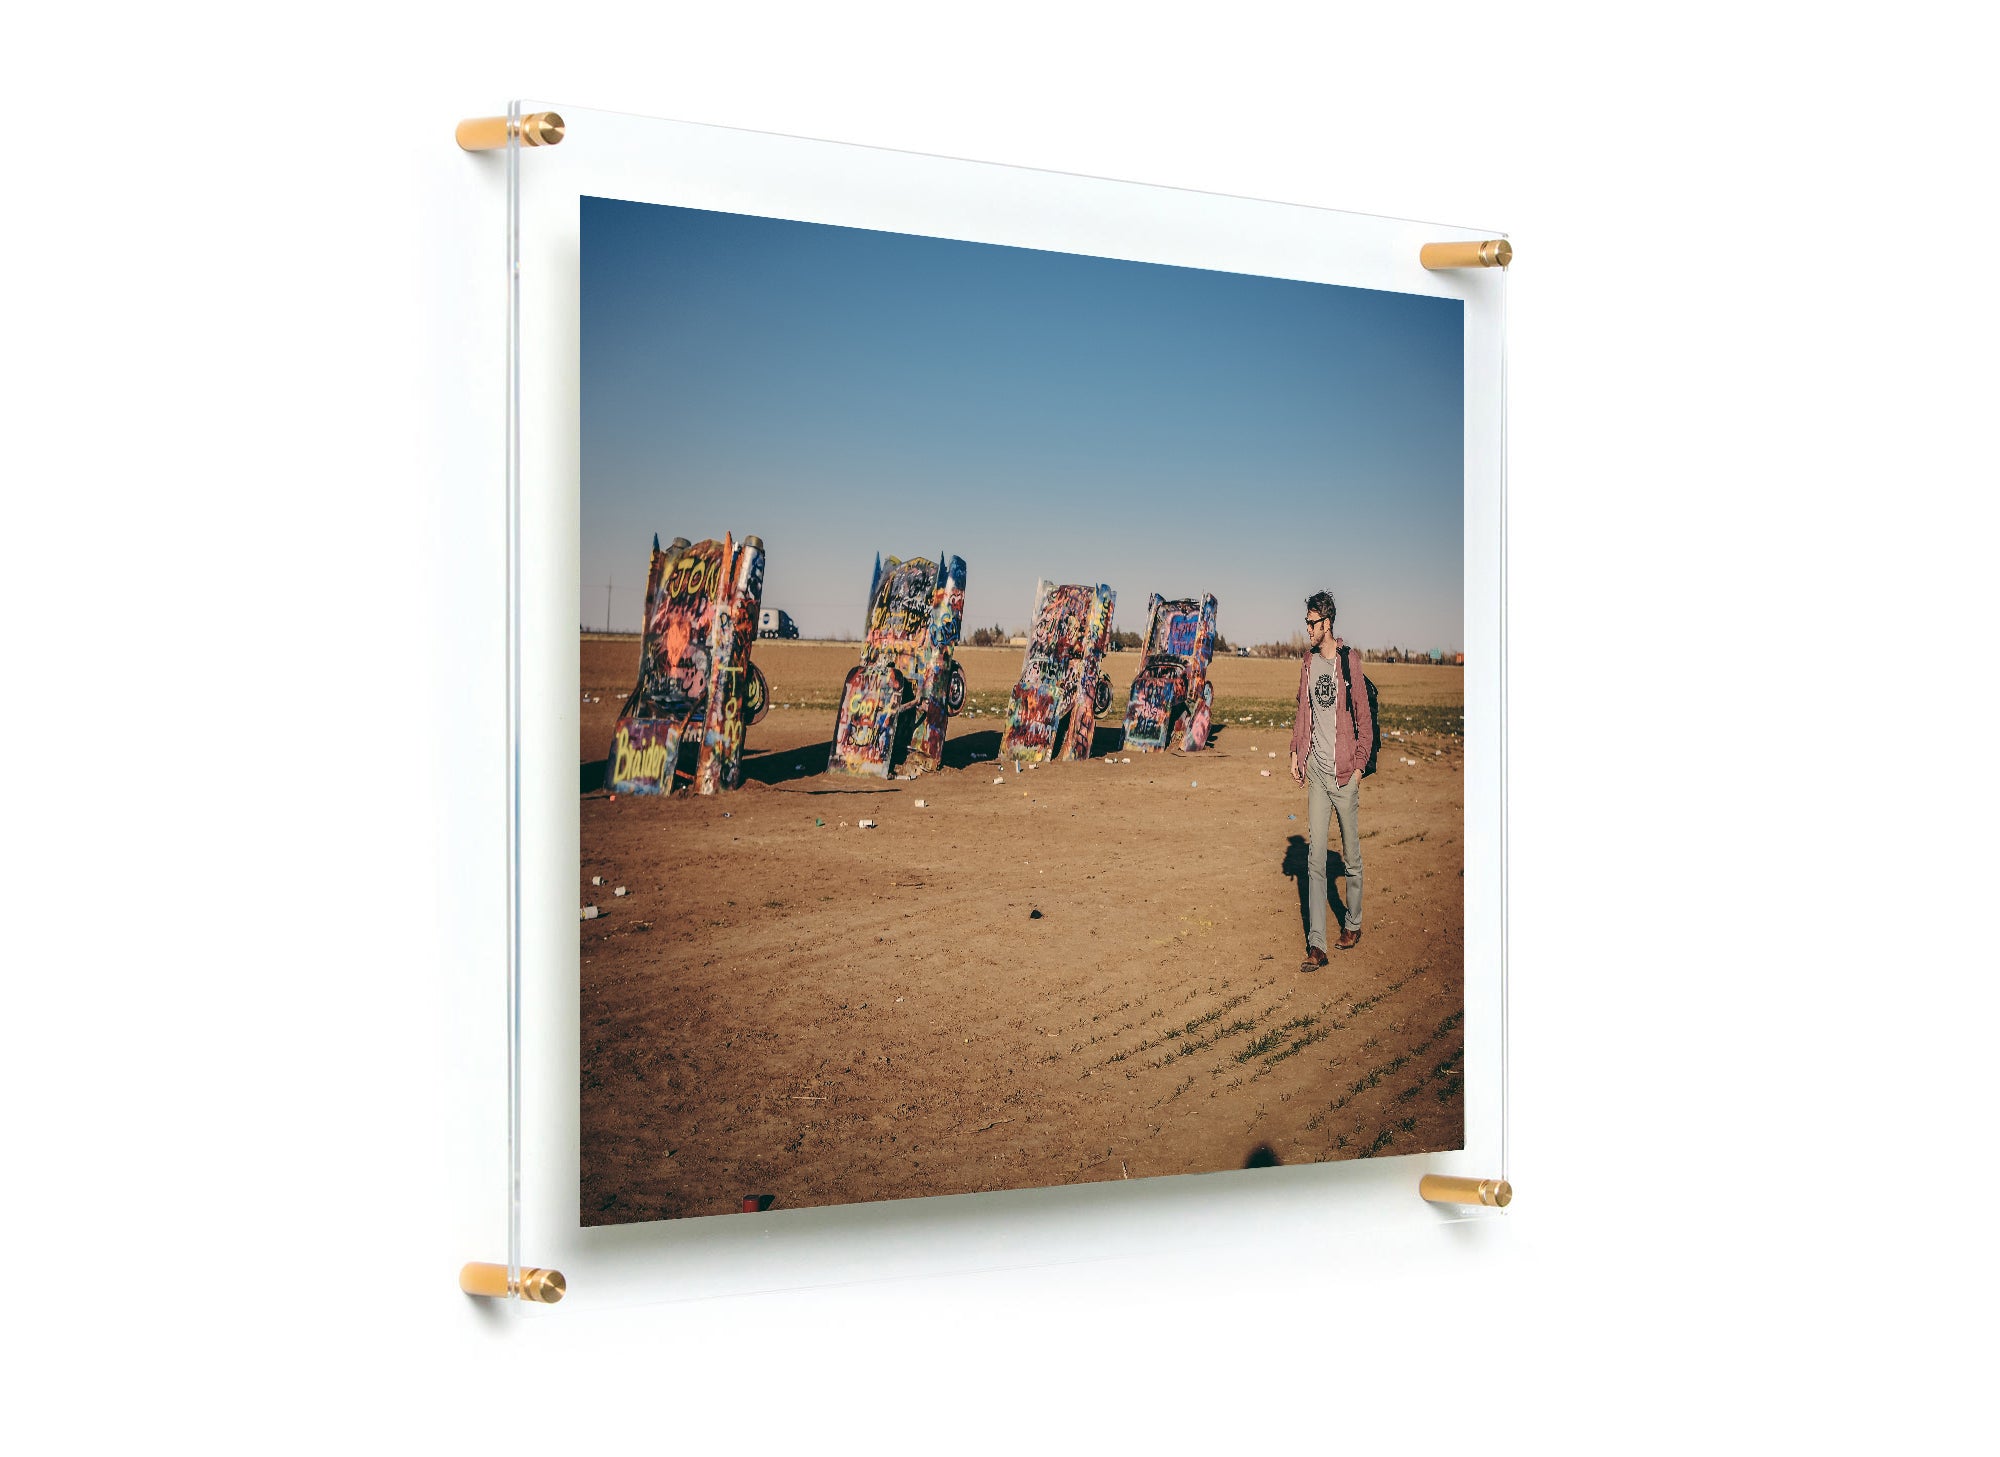 Case Pack of Four: 23" x 33" Double Panel Frames